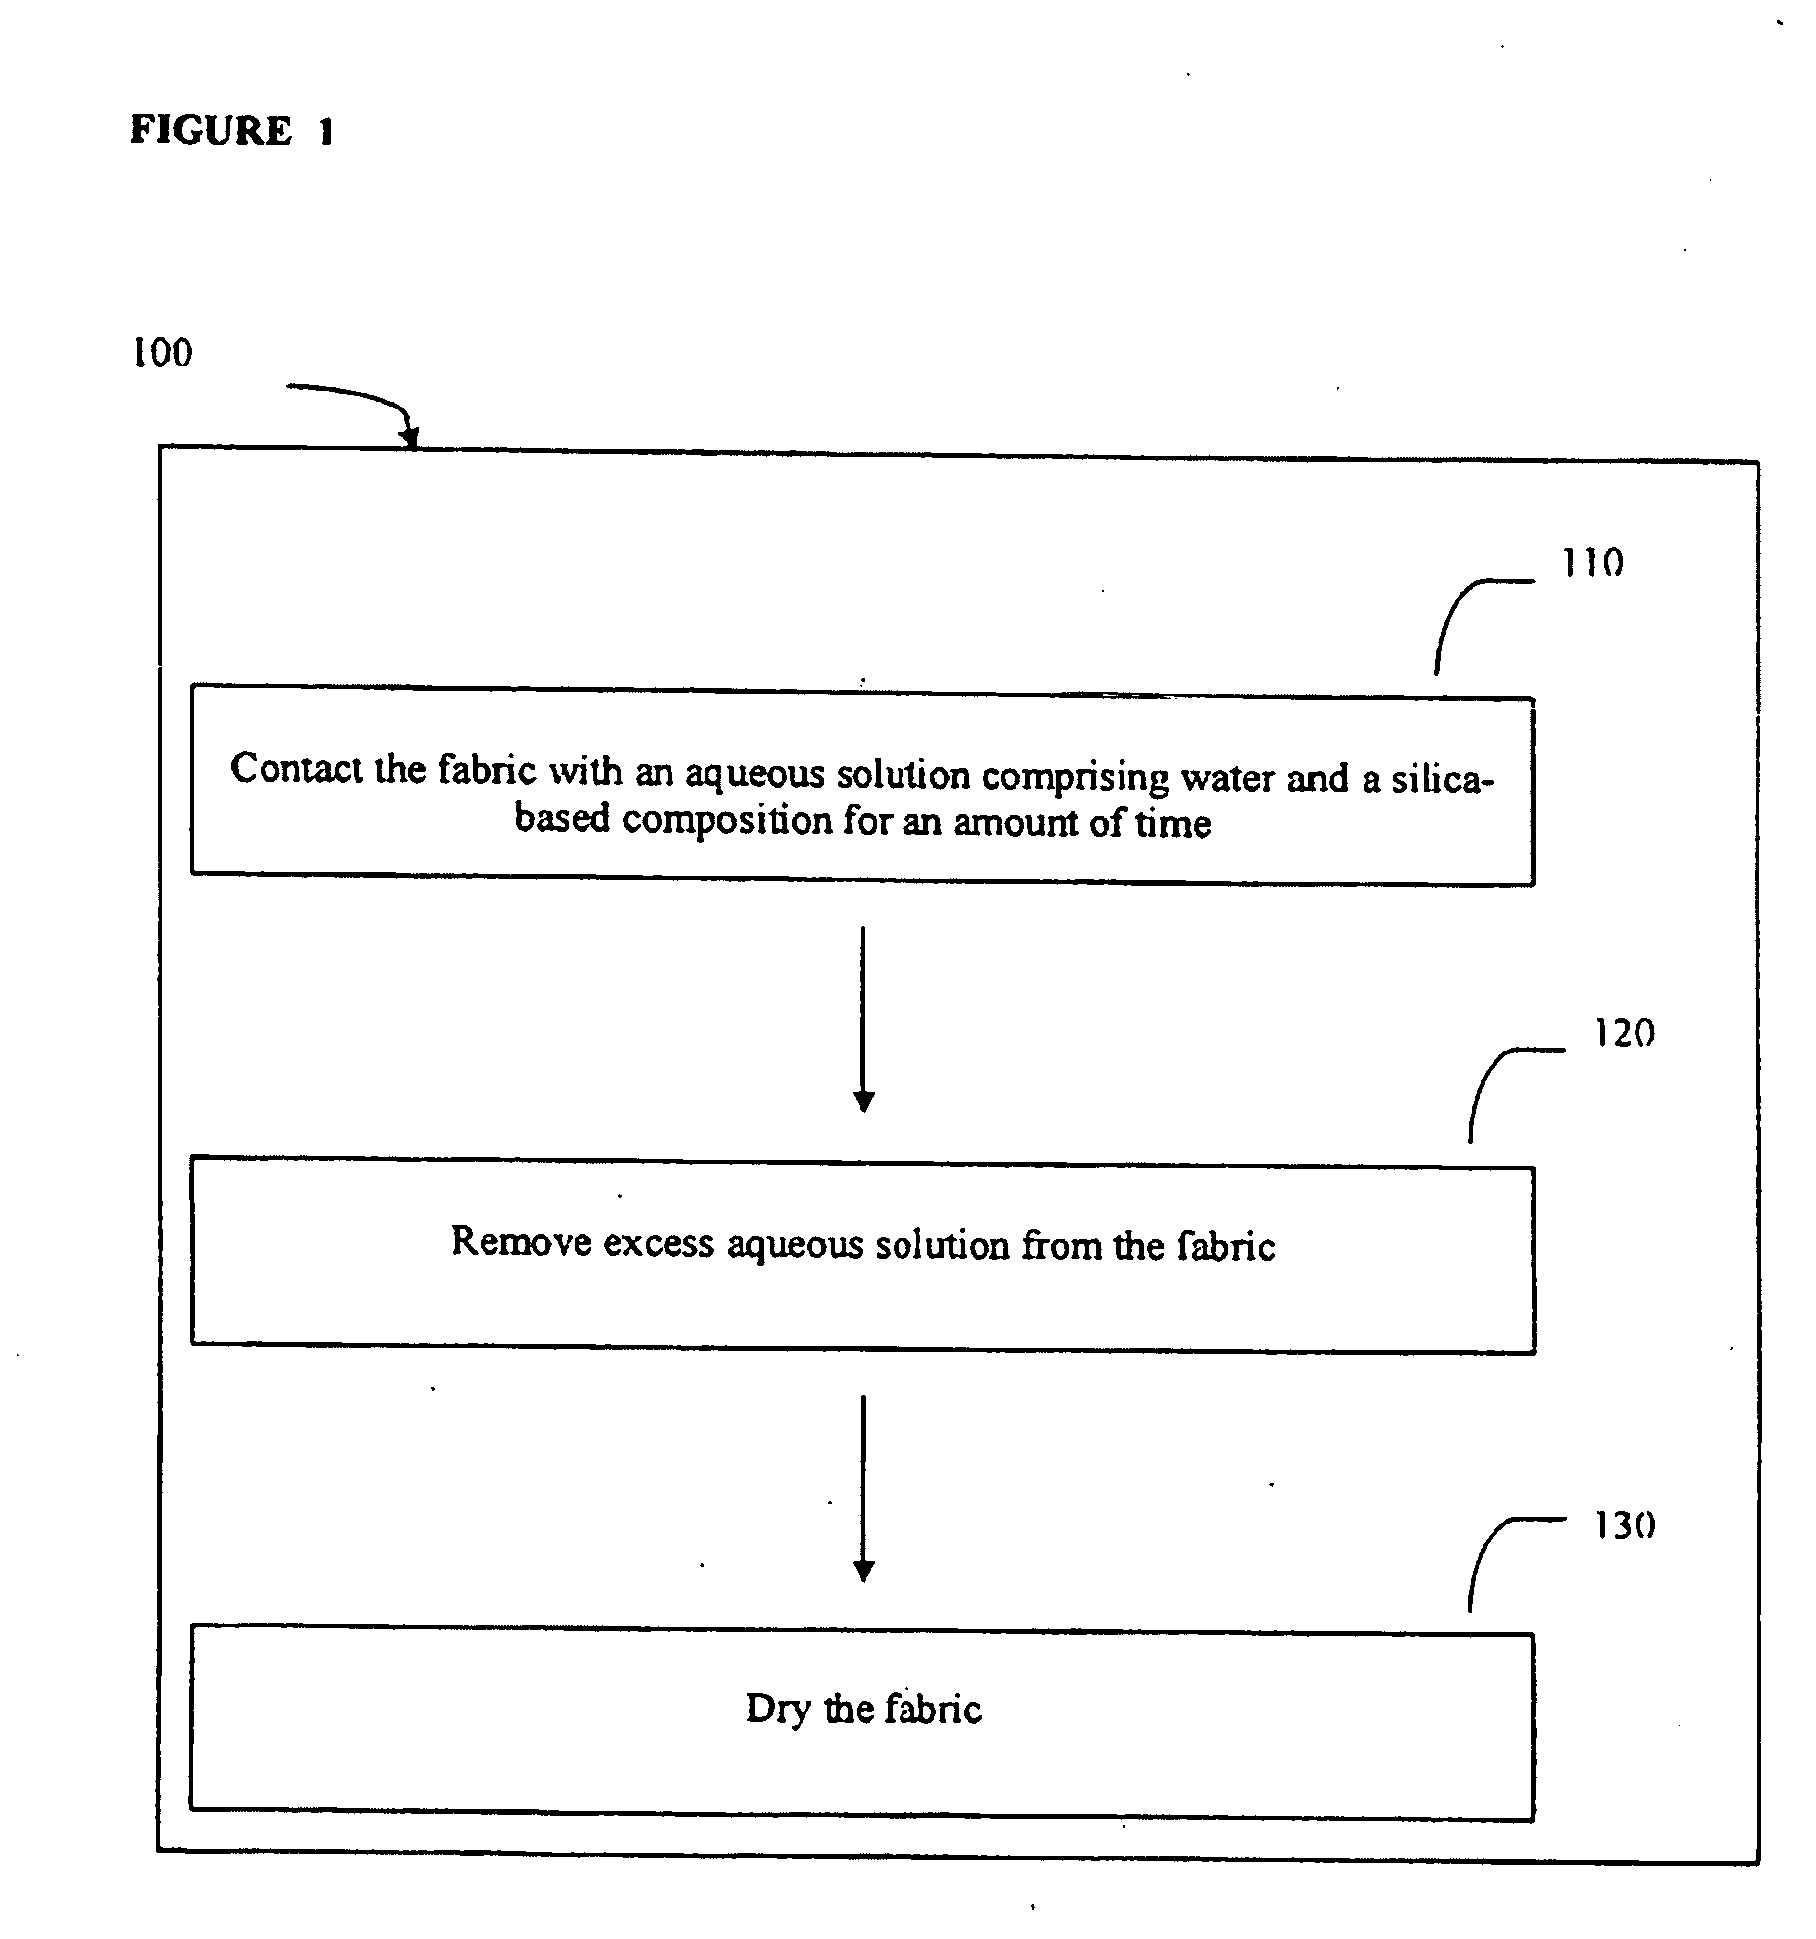 Methods and compositions for improving the surface properties of fabrics, garments, textiles and other substrates